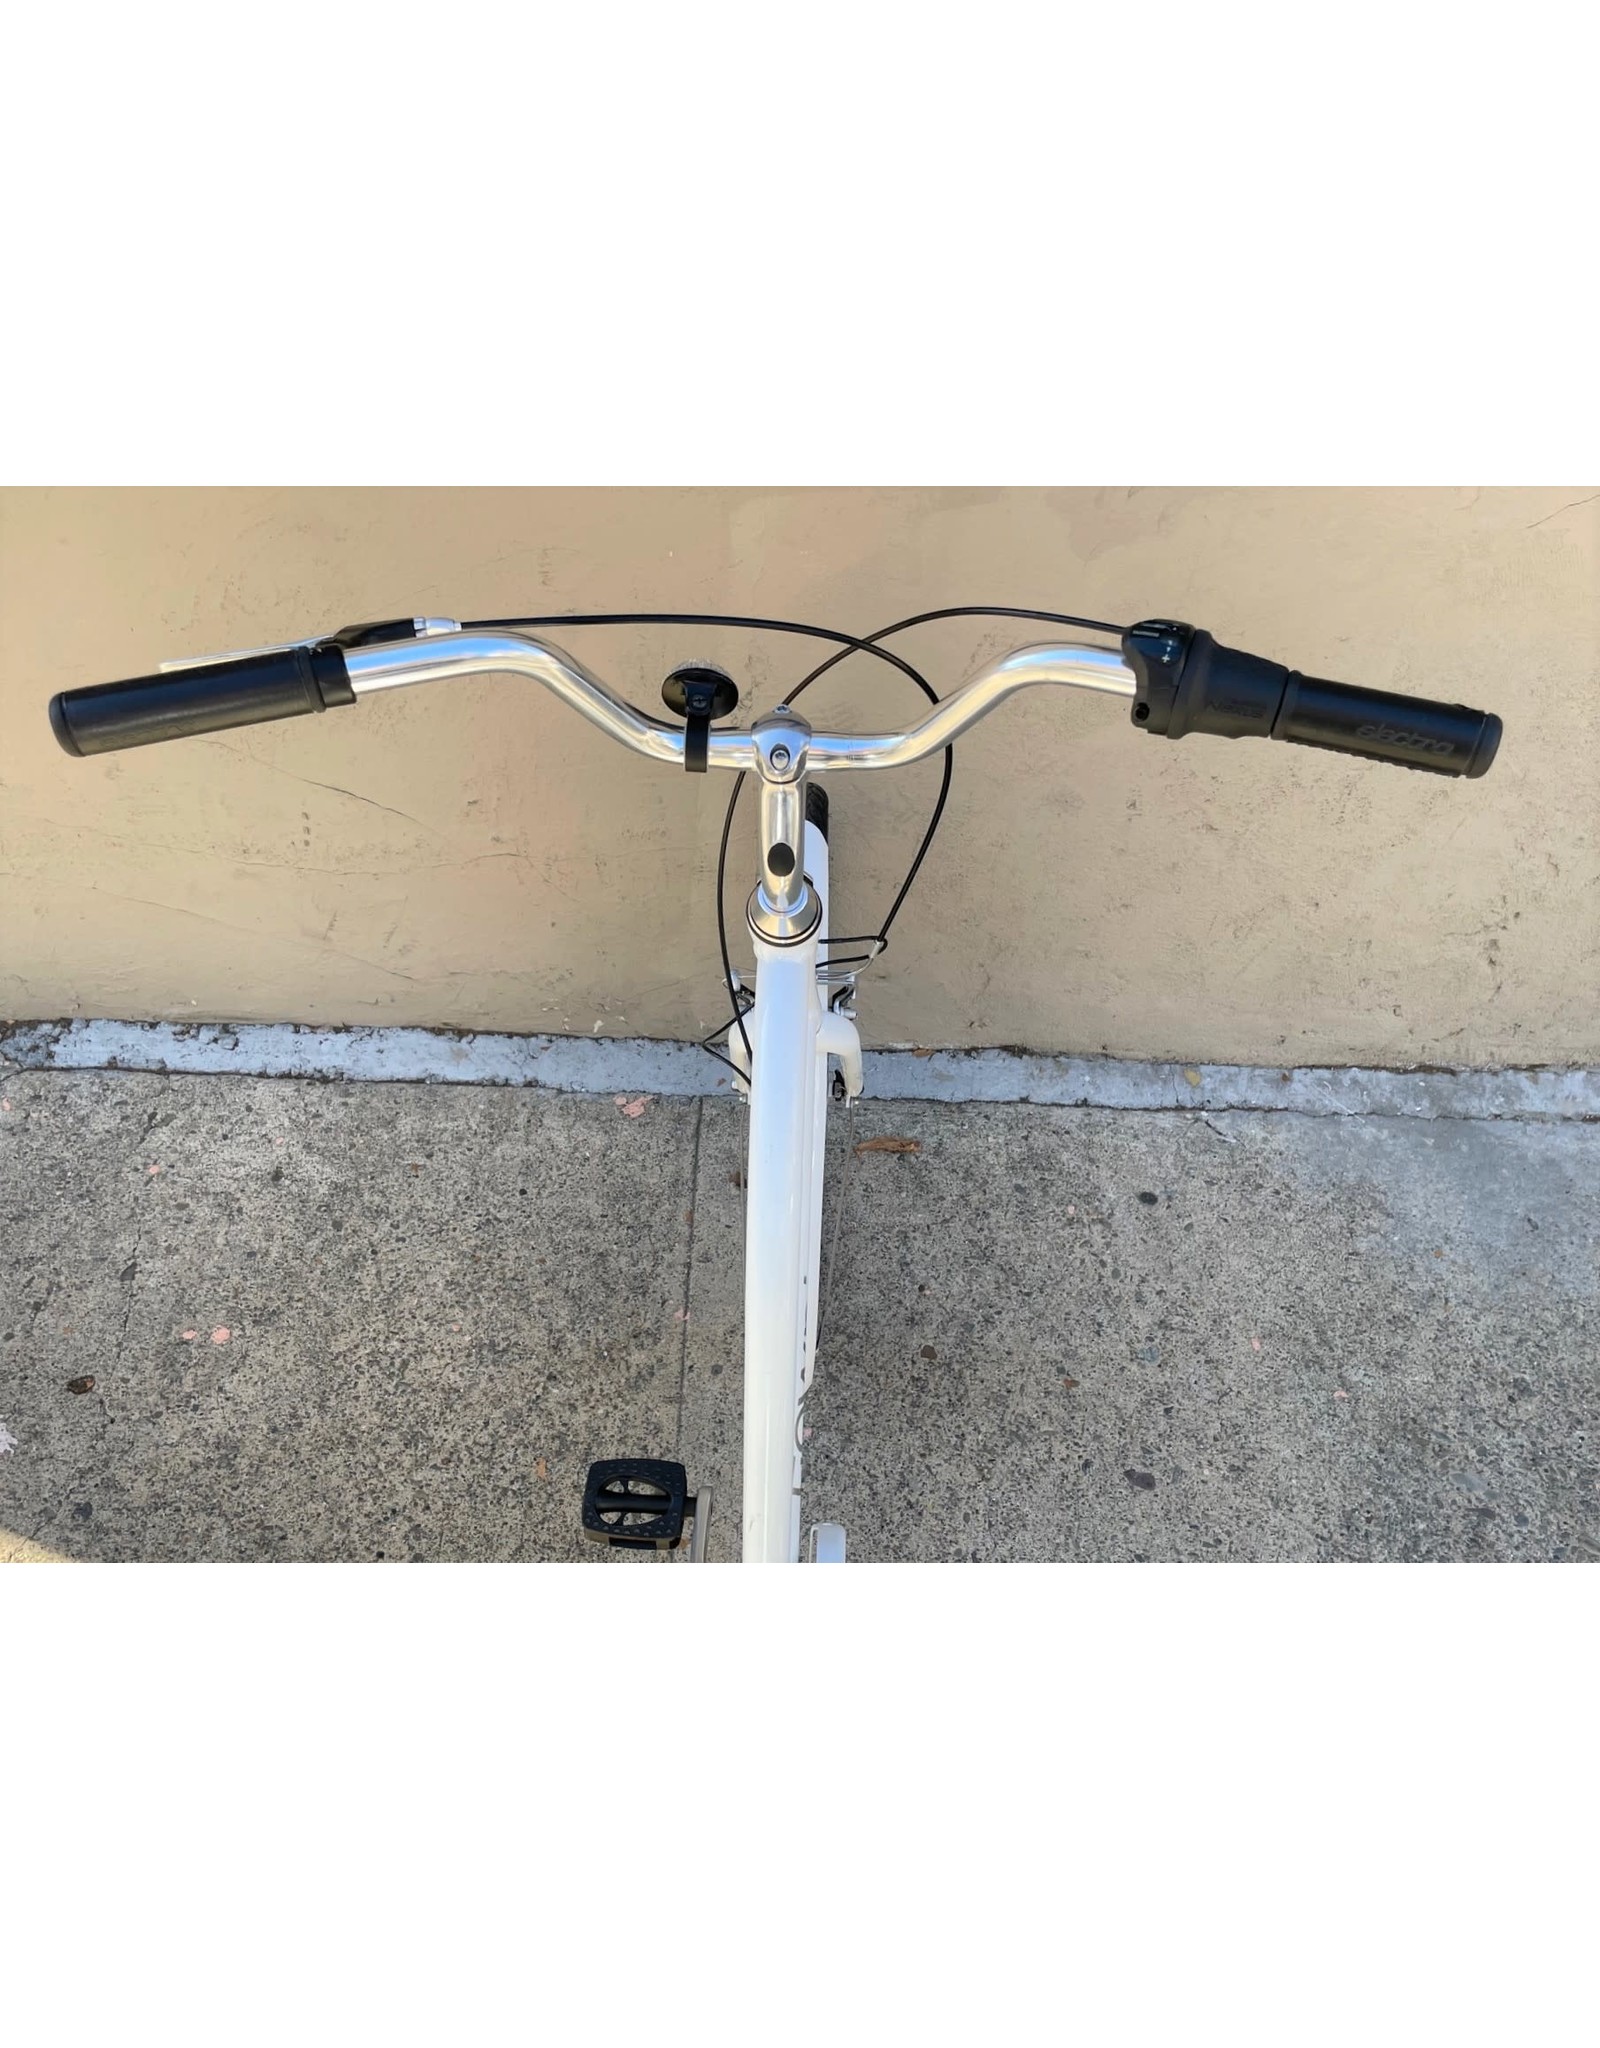 ELECTRA Electra Townie 3i, 21 Inches, White